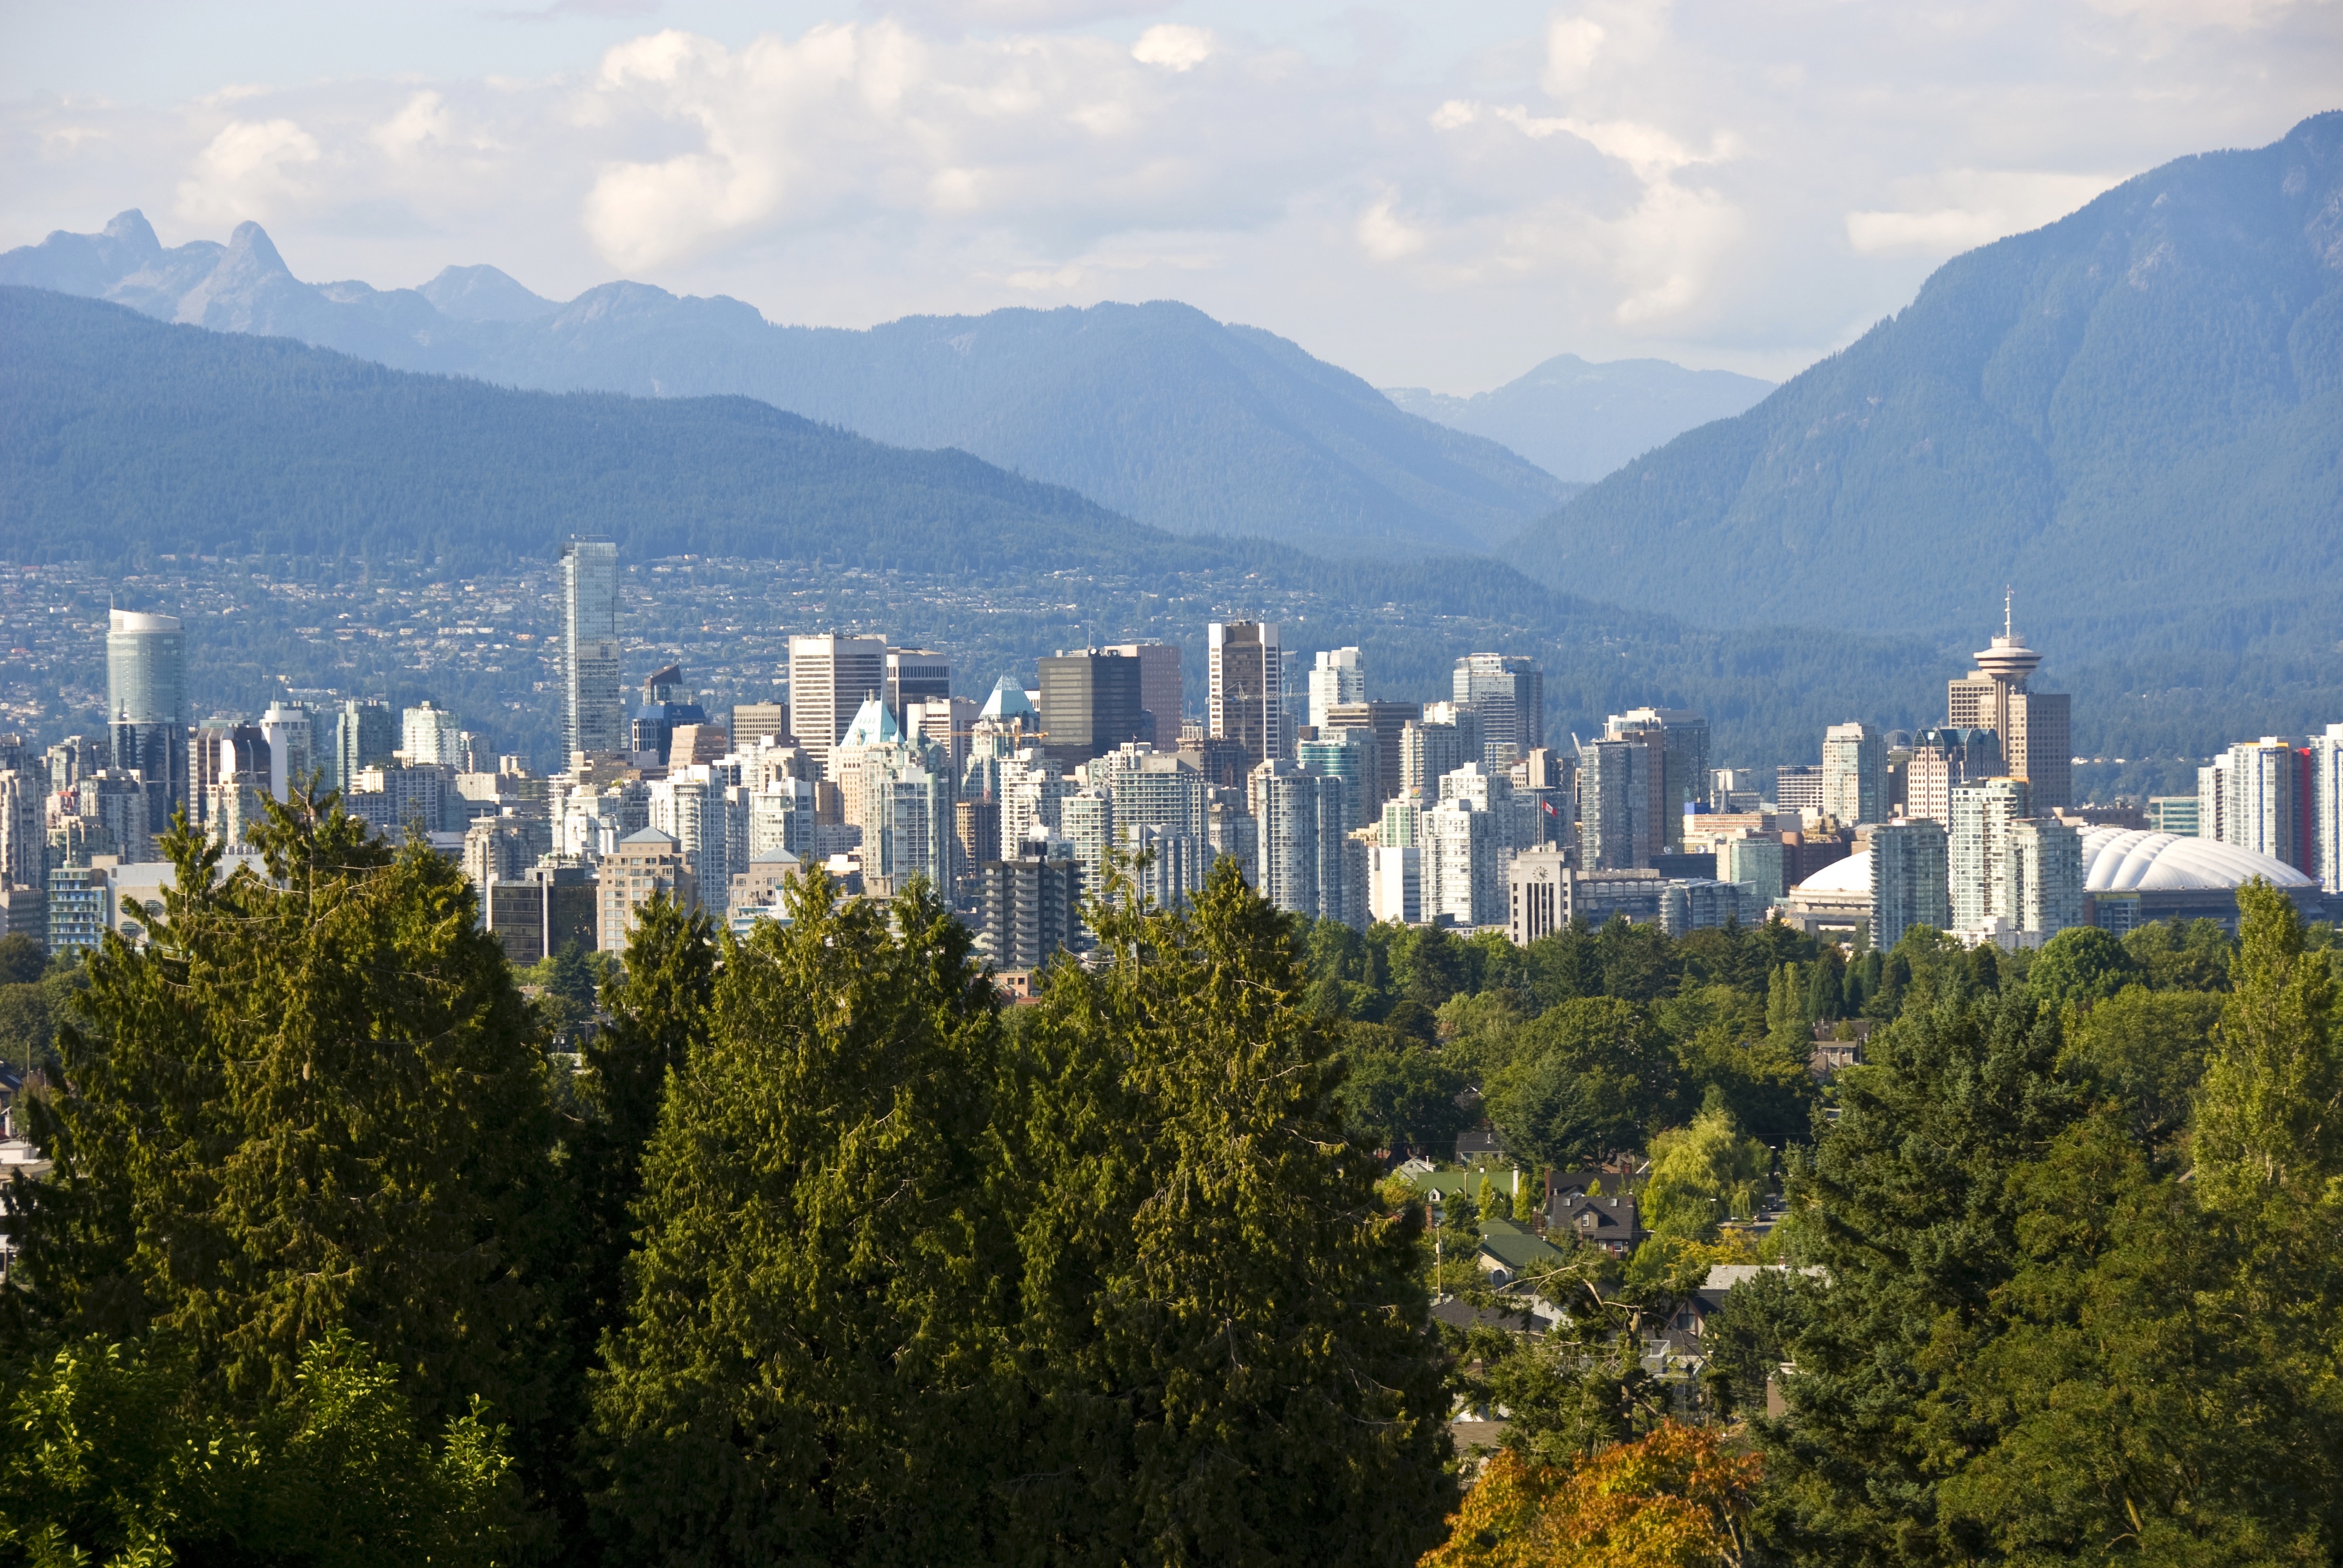 Vancouver greenest city by 2020